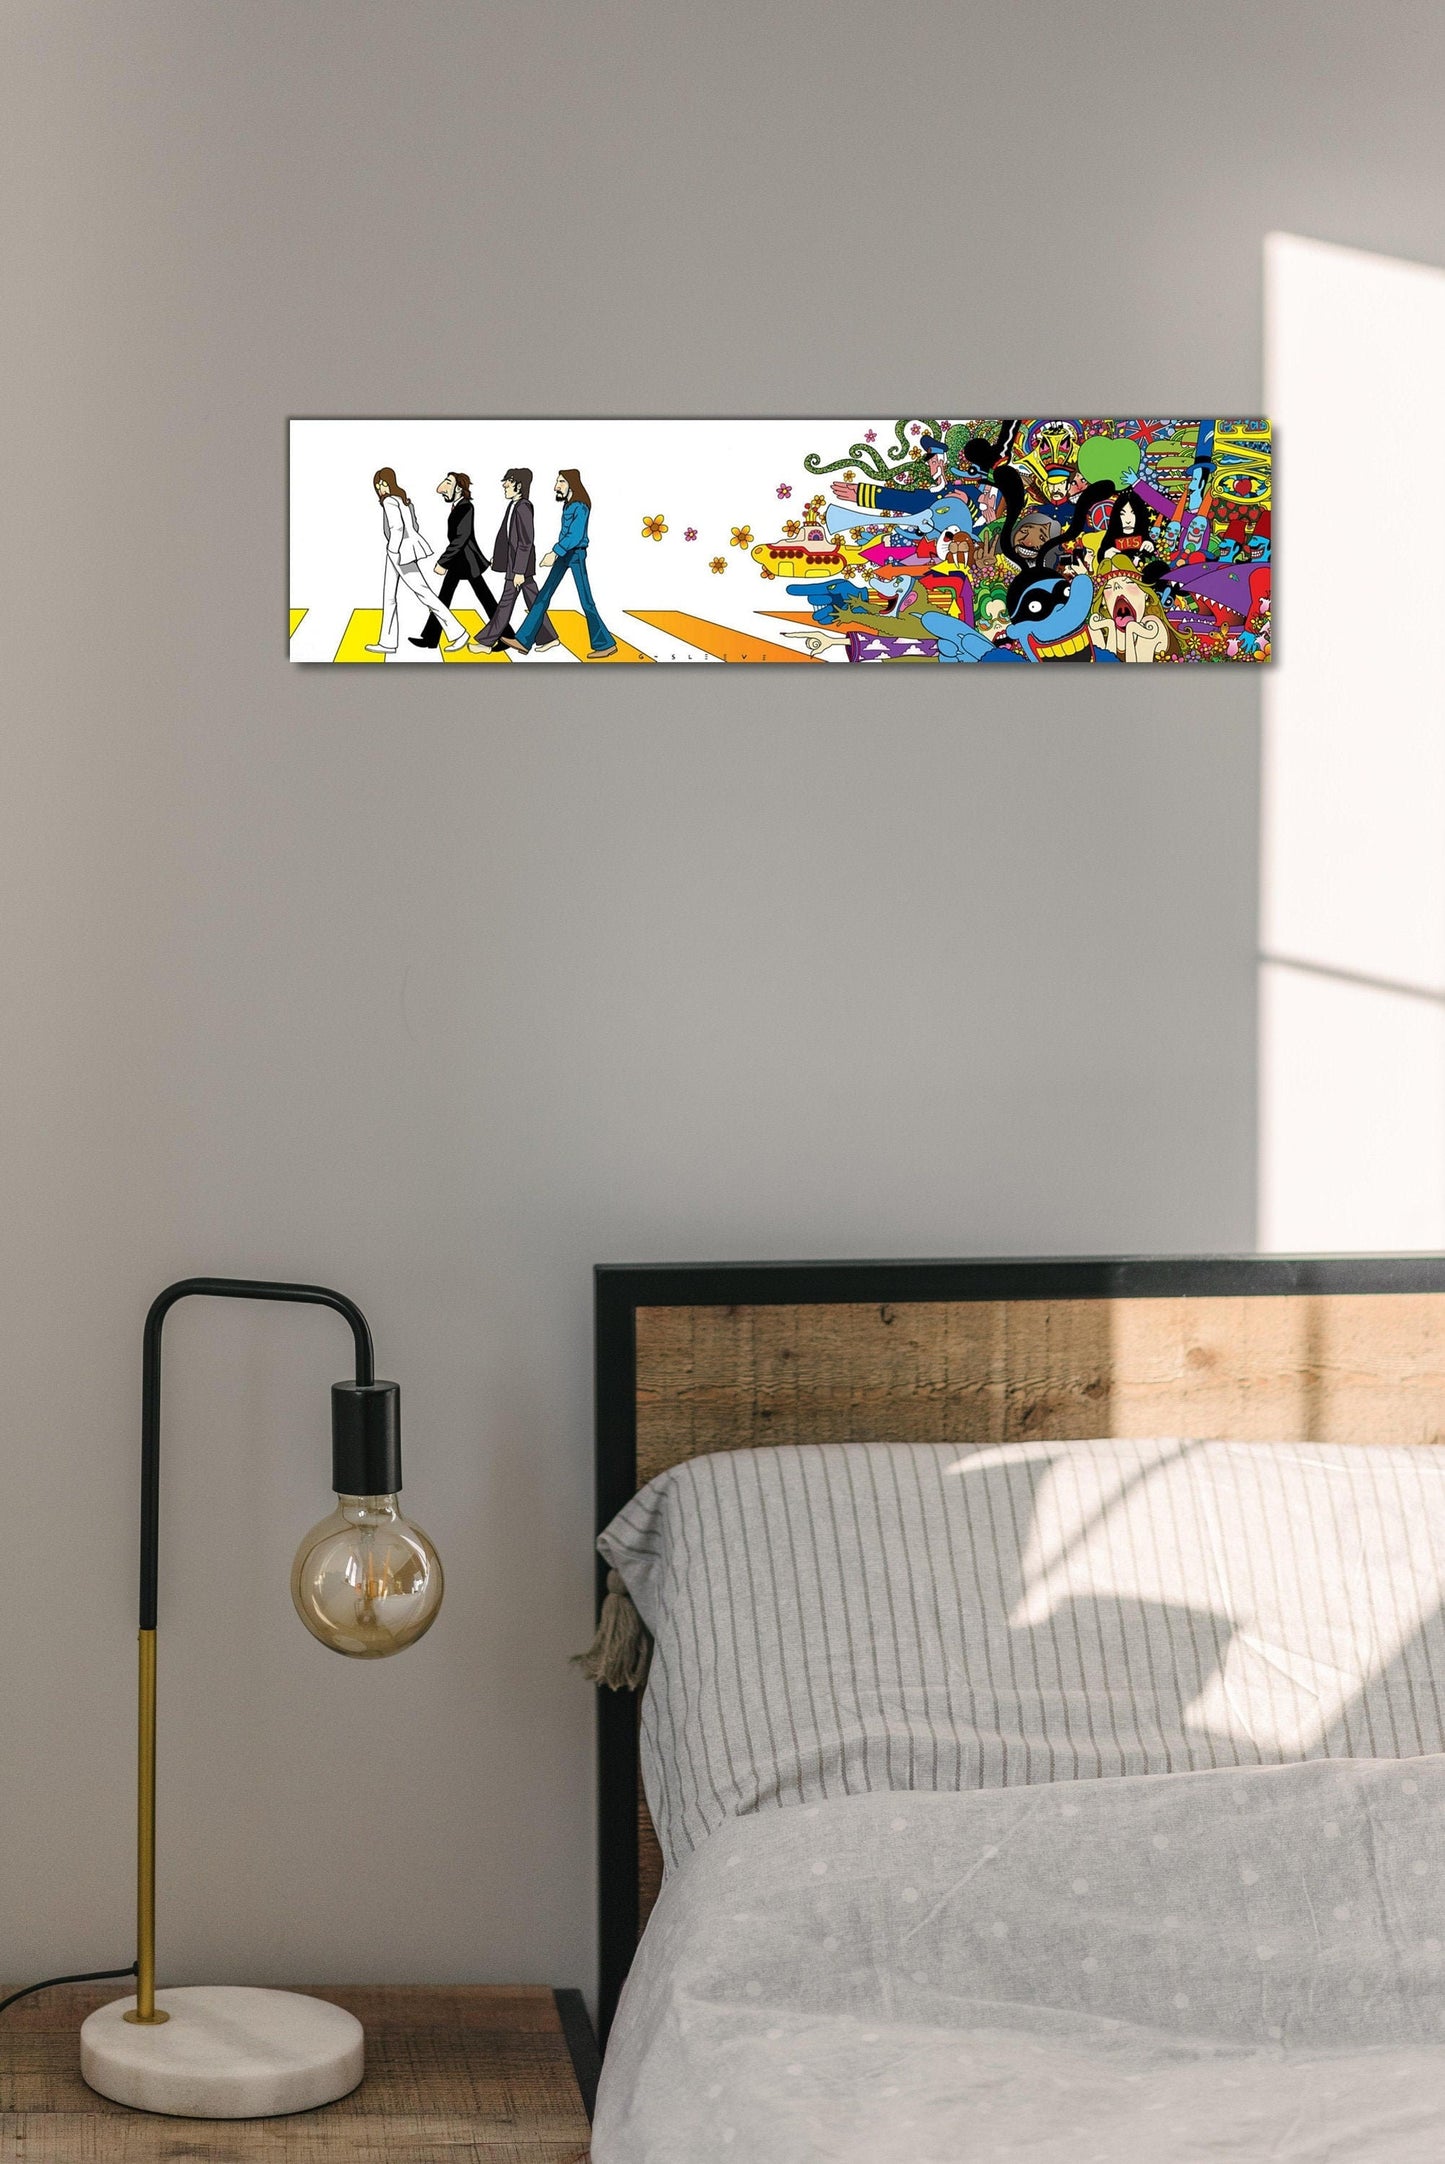 The Beatles Abbey Road Art - Museum Quality Giclee Canvas Print Stretched